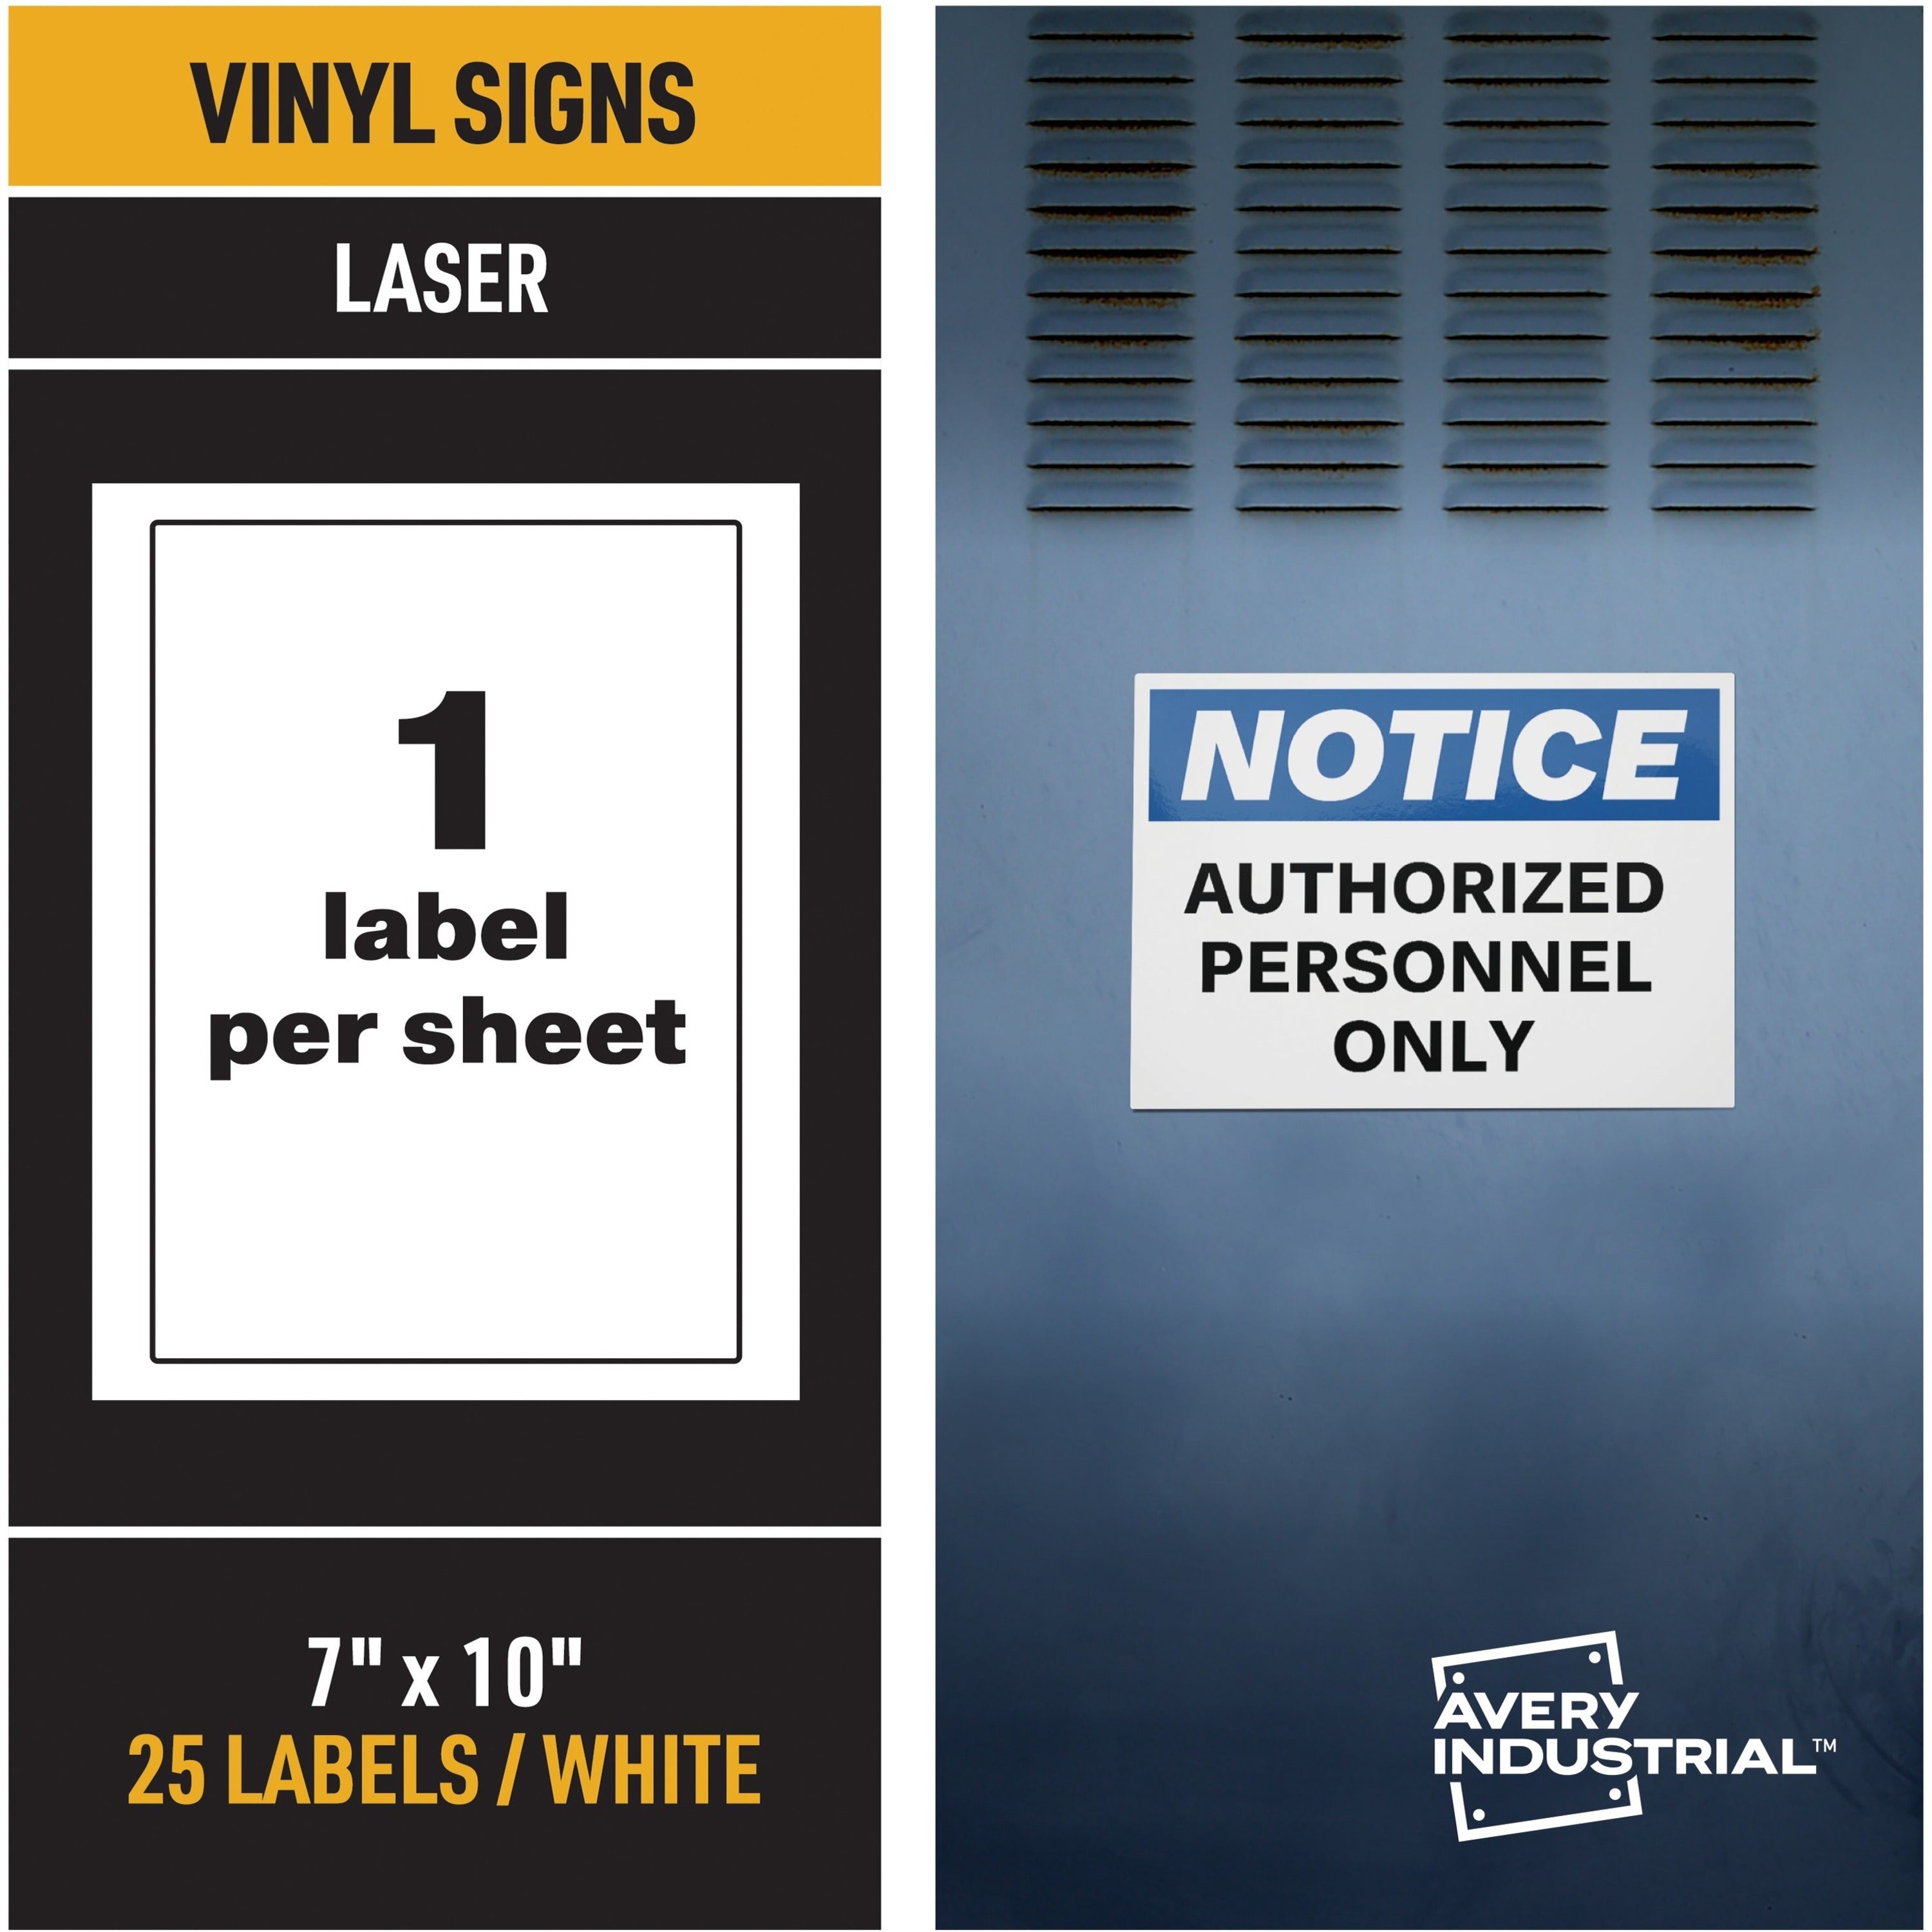 avery-adhesive-printable-vinyl-signs-waterproof-5-width-x-7-length-permanent-adhesive-rectangle-laser-white-vinyl-1-sheet-25-total-sheets-25-total-labels-25-label-print-to-the-edge-permanent-adhesive-customizable_ave61552 - 1